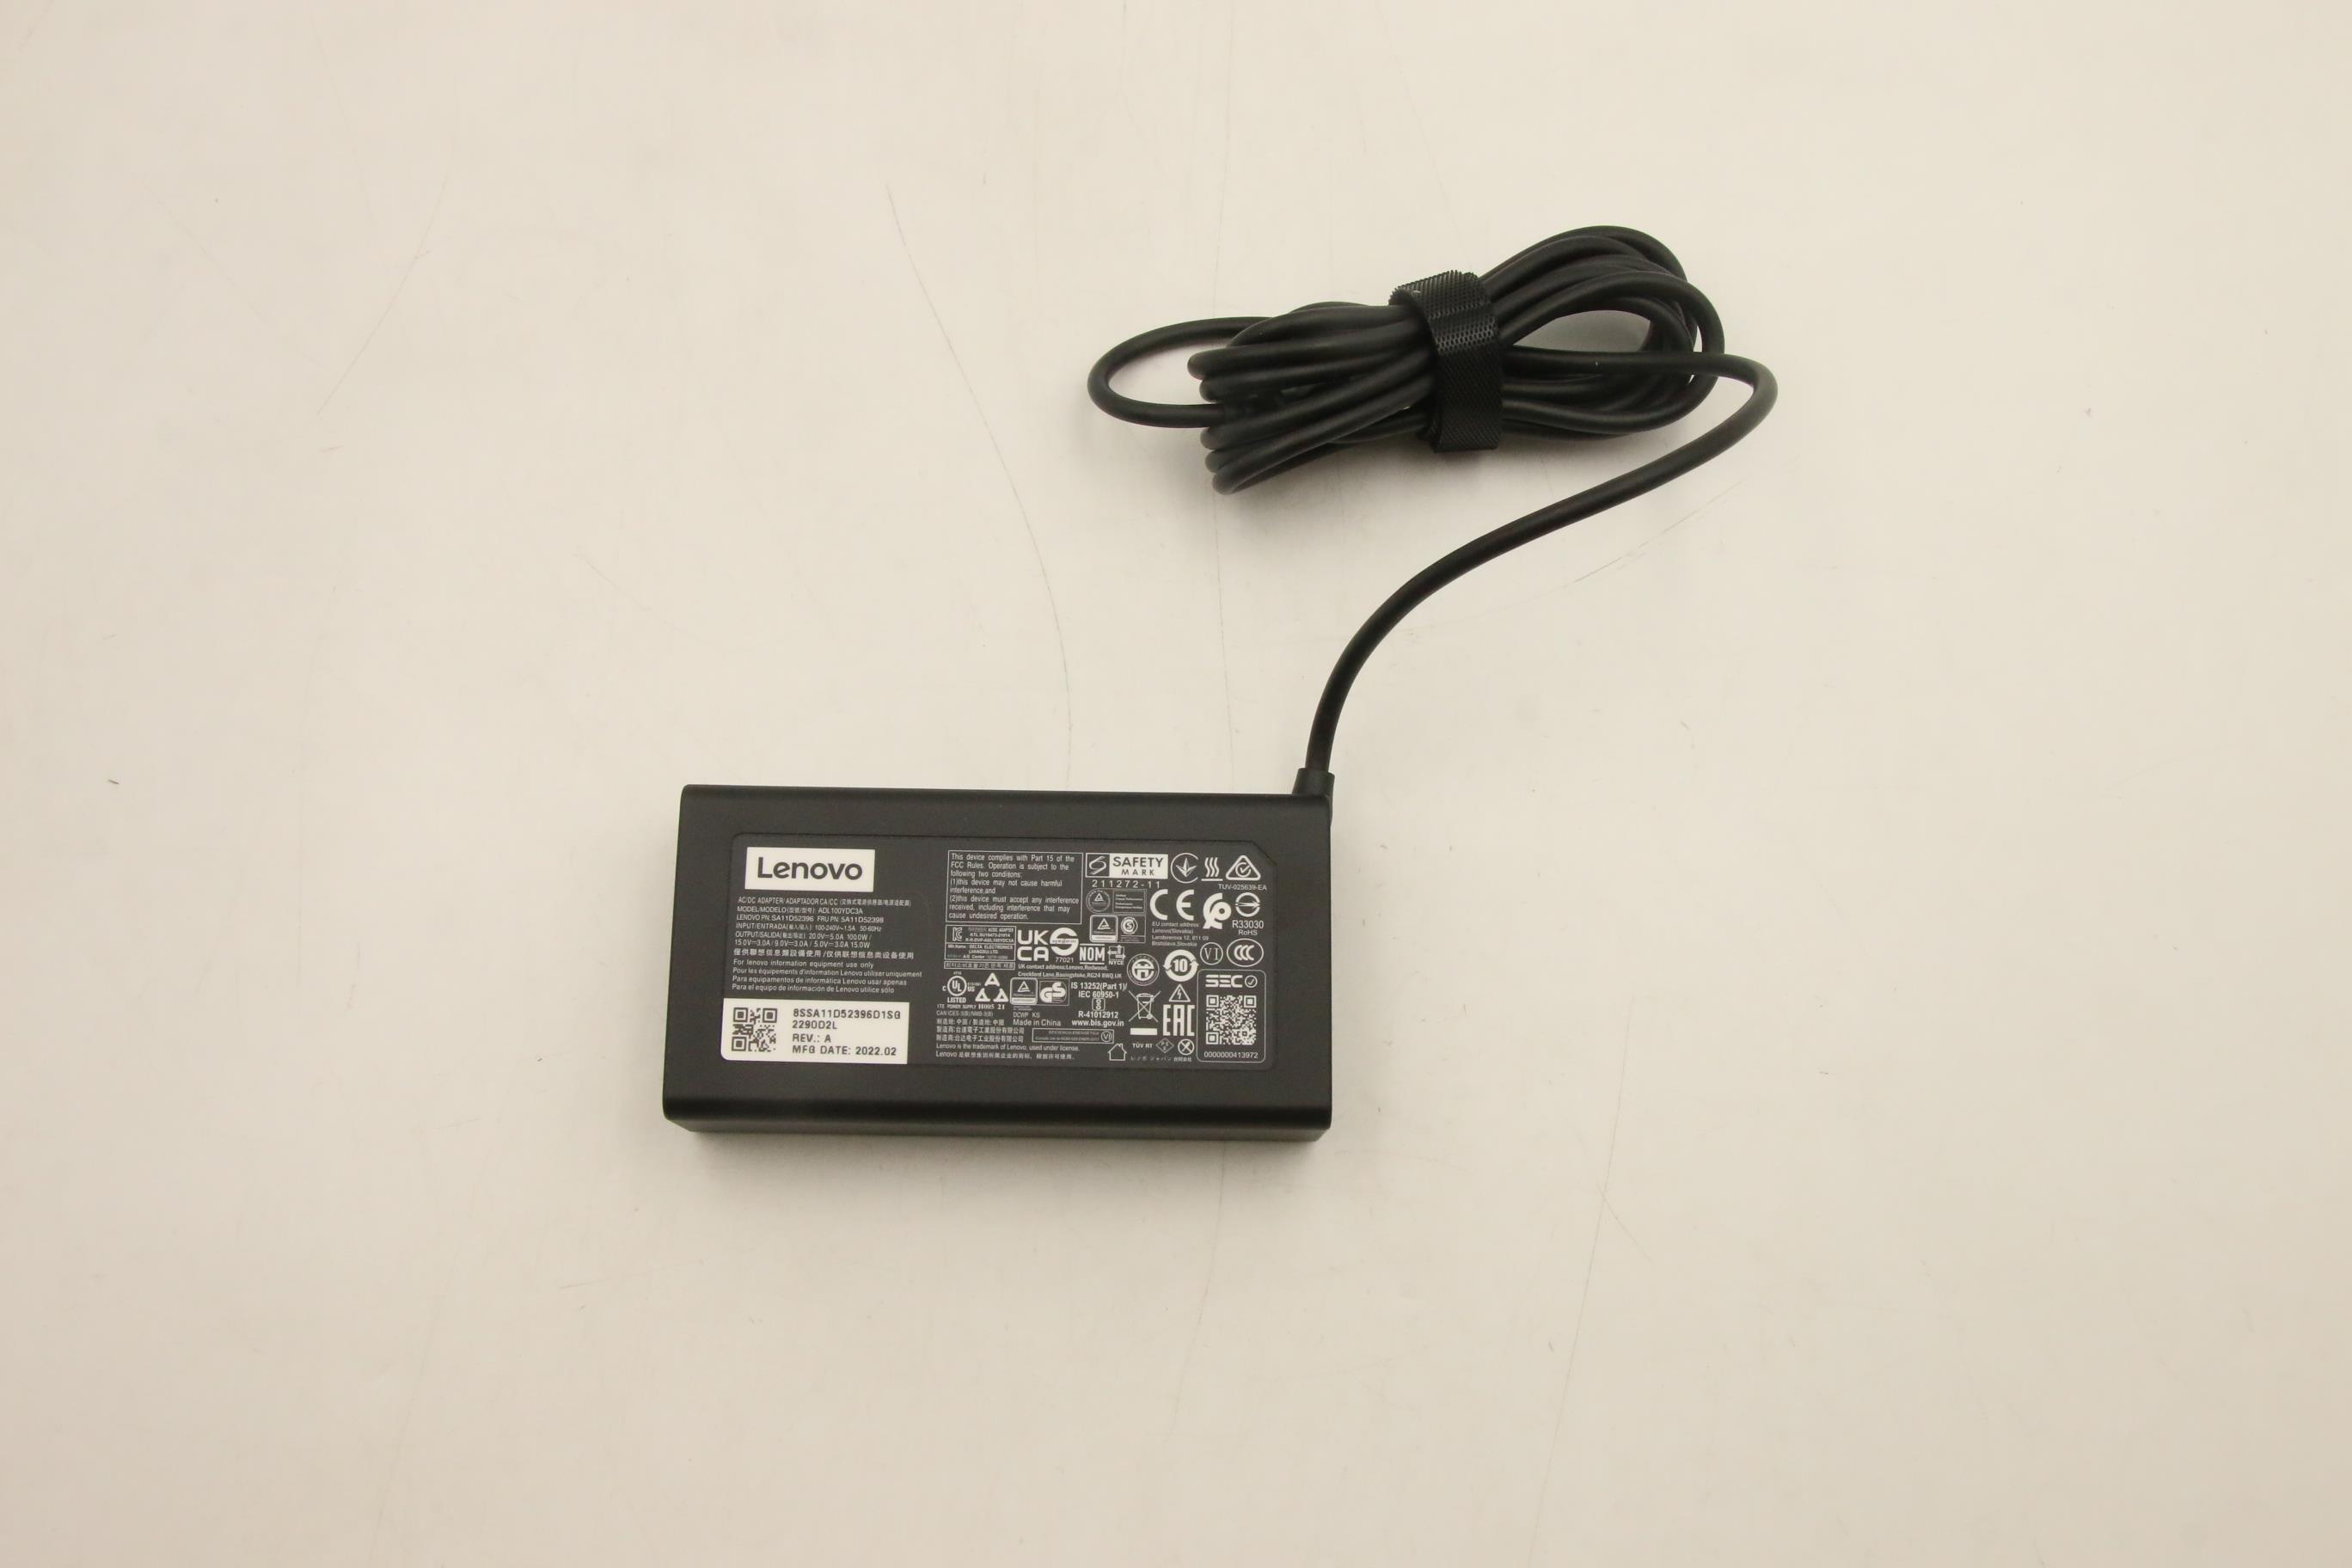 Lenovo ThinkPad T16 Gen 1 (21CH, 21CJ) Laptop Charger (AC Adapter) - 5A11D52398